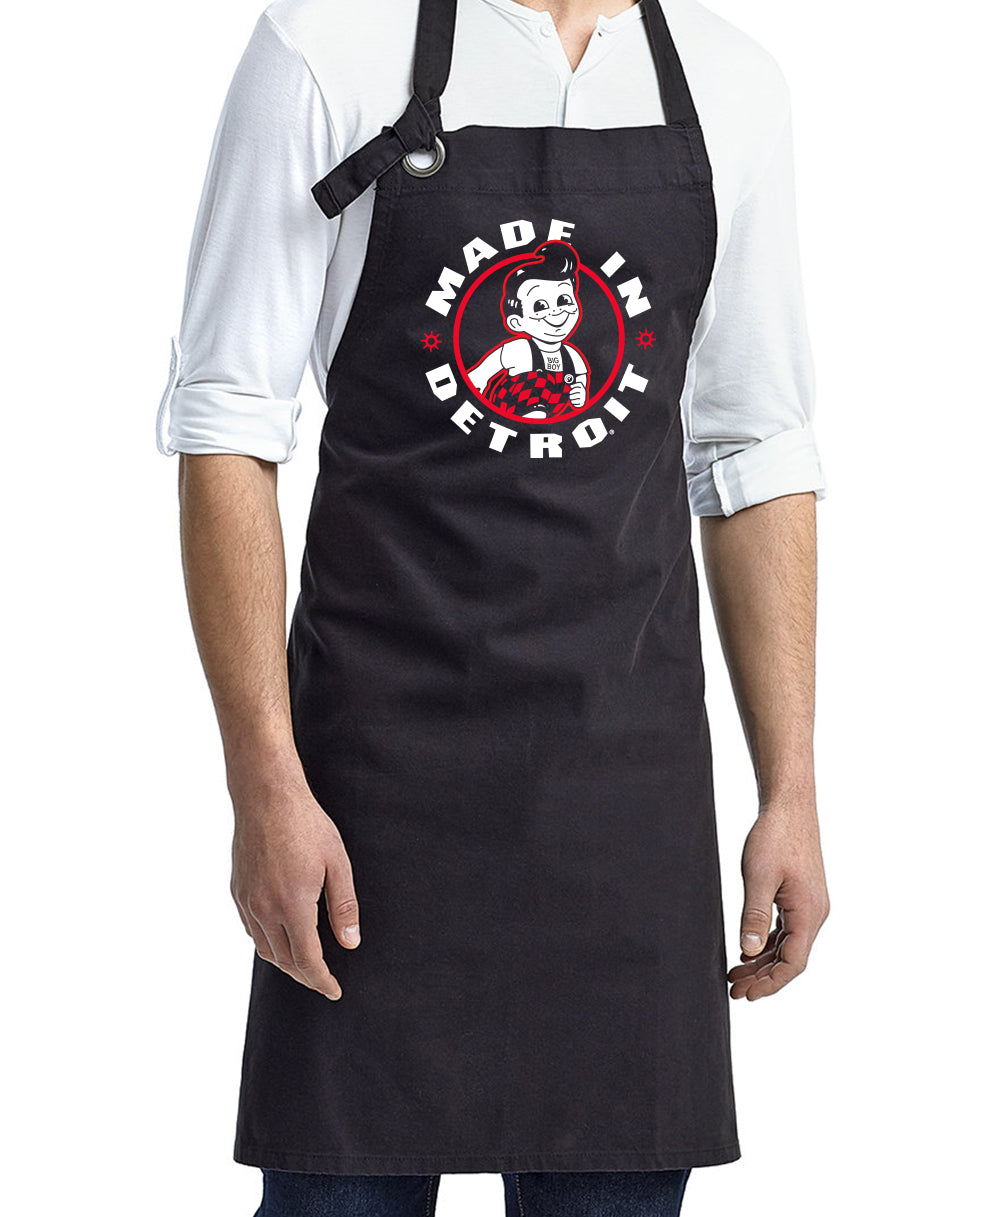 MID Grilling Apron